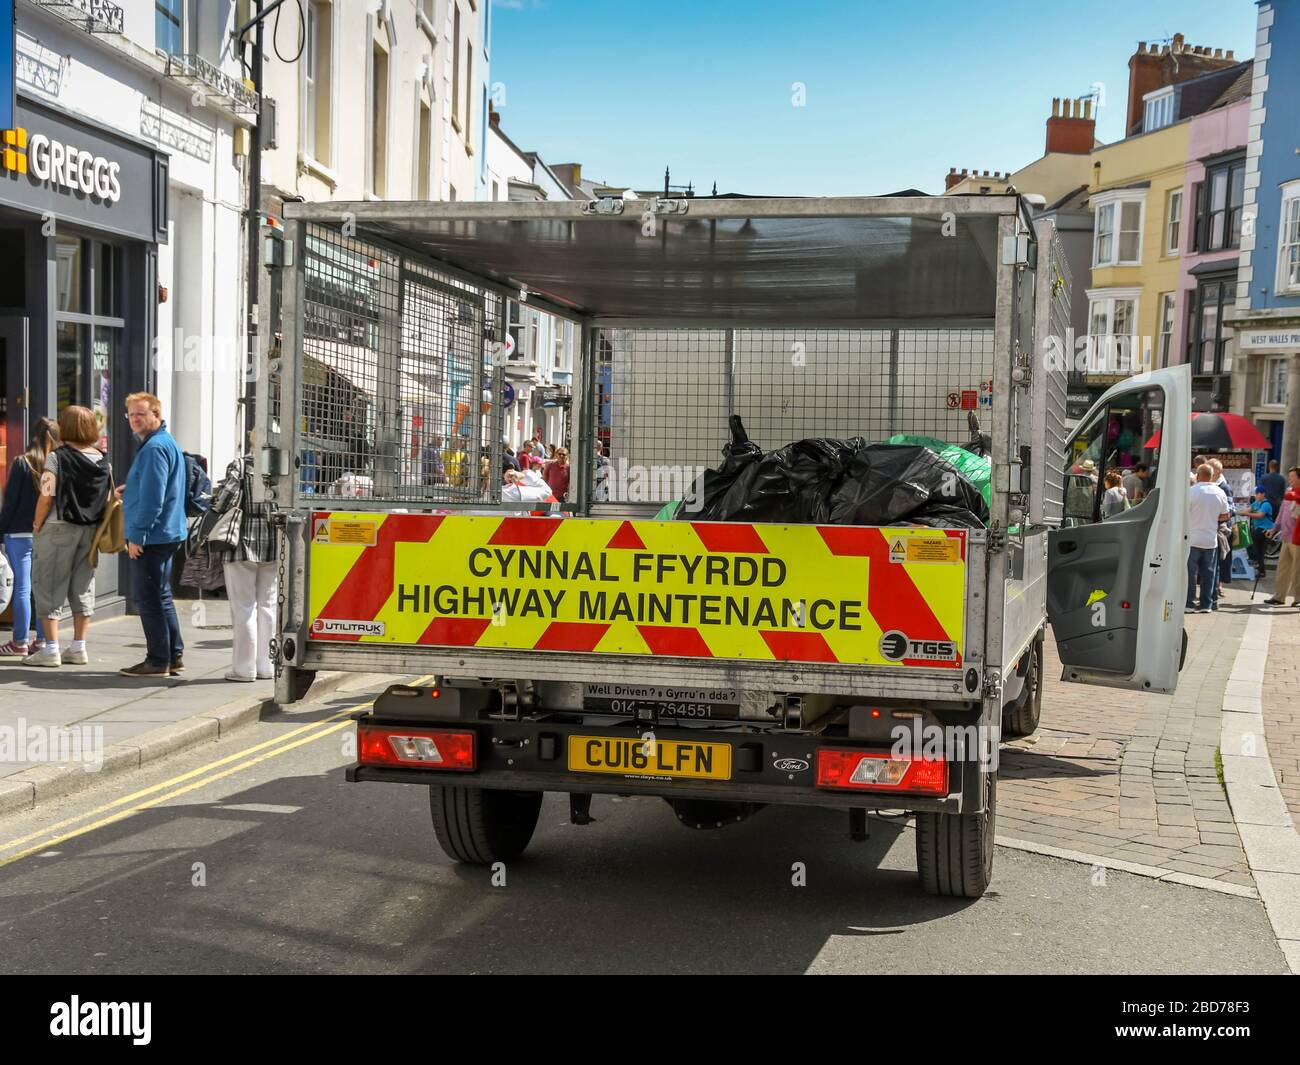 TENBY, PEMBROKESHIRE, WALES - AUGUST 2018: County council rubbish collection vehicle parked in the town centre of Tenby, West Wales. Stock Photo